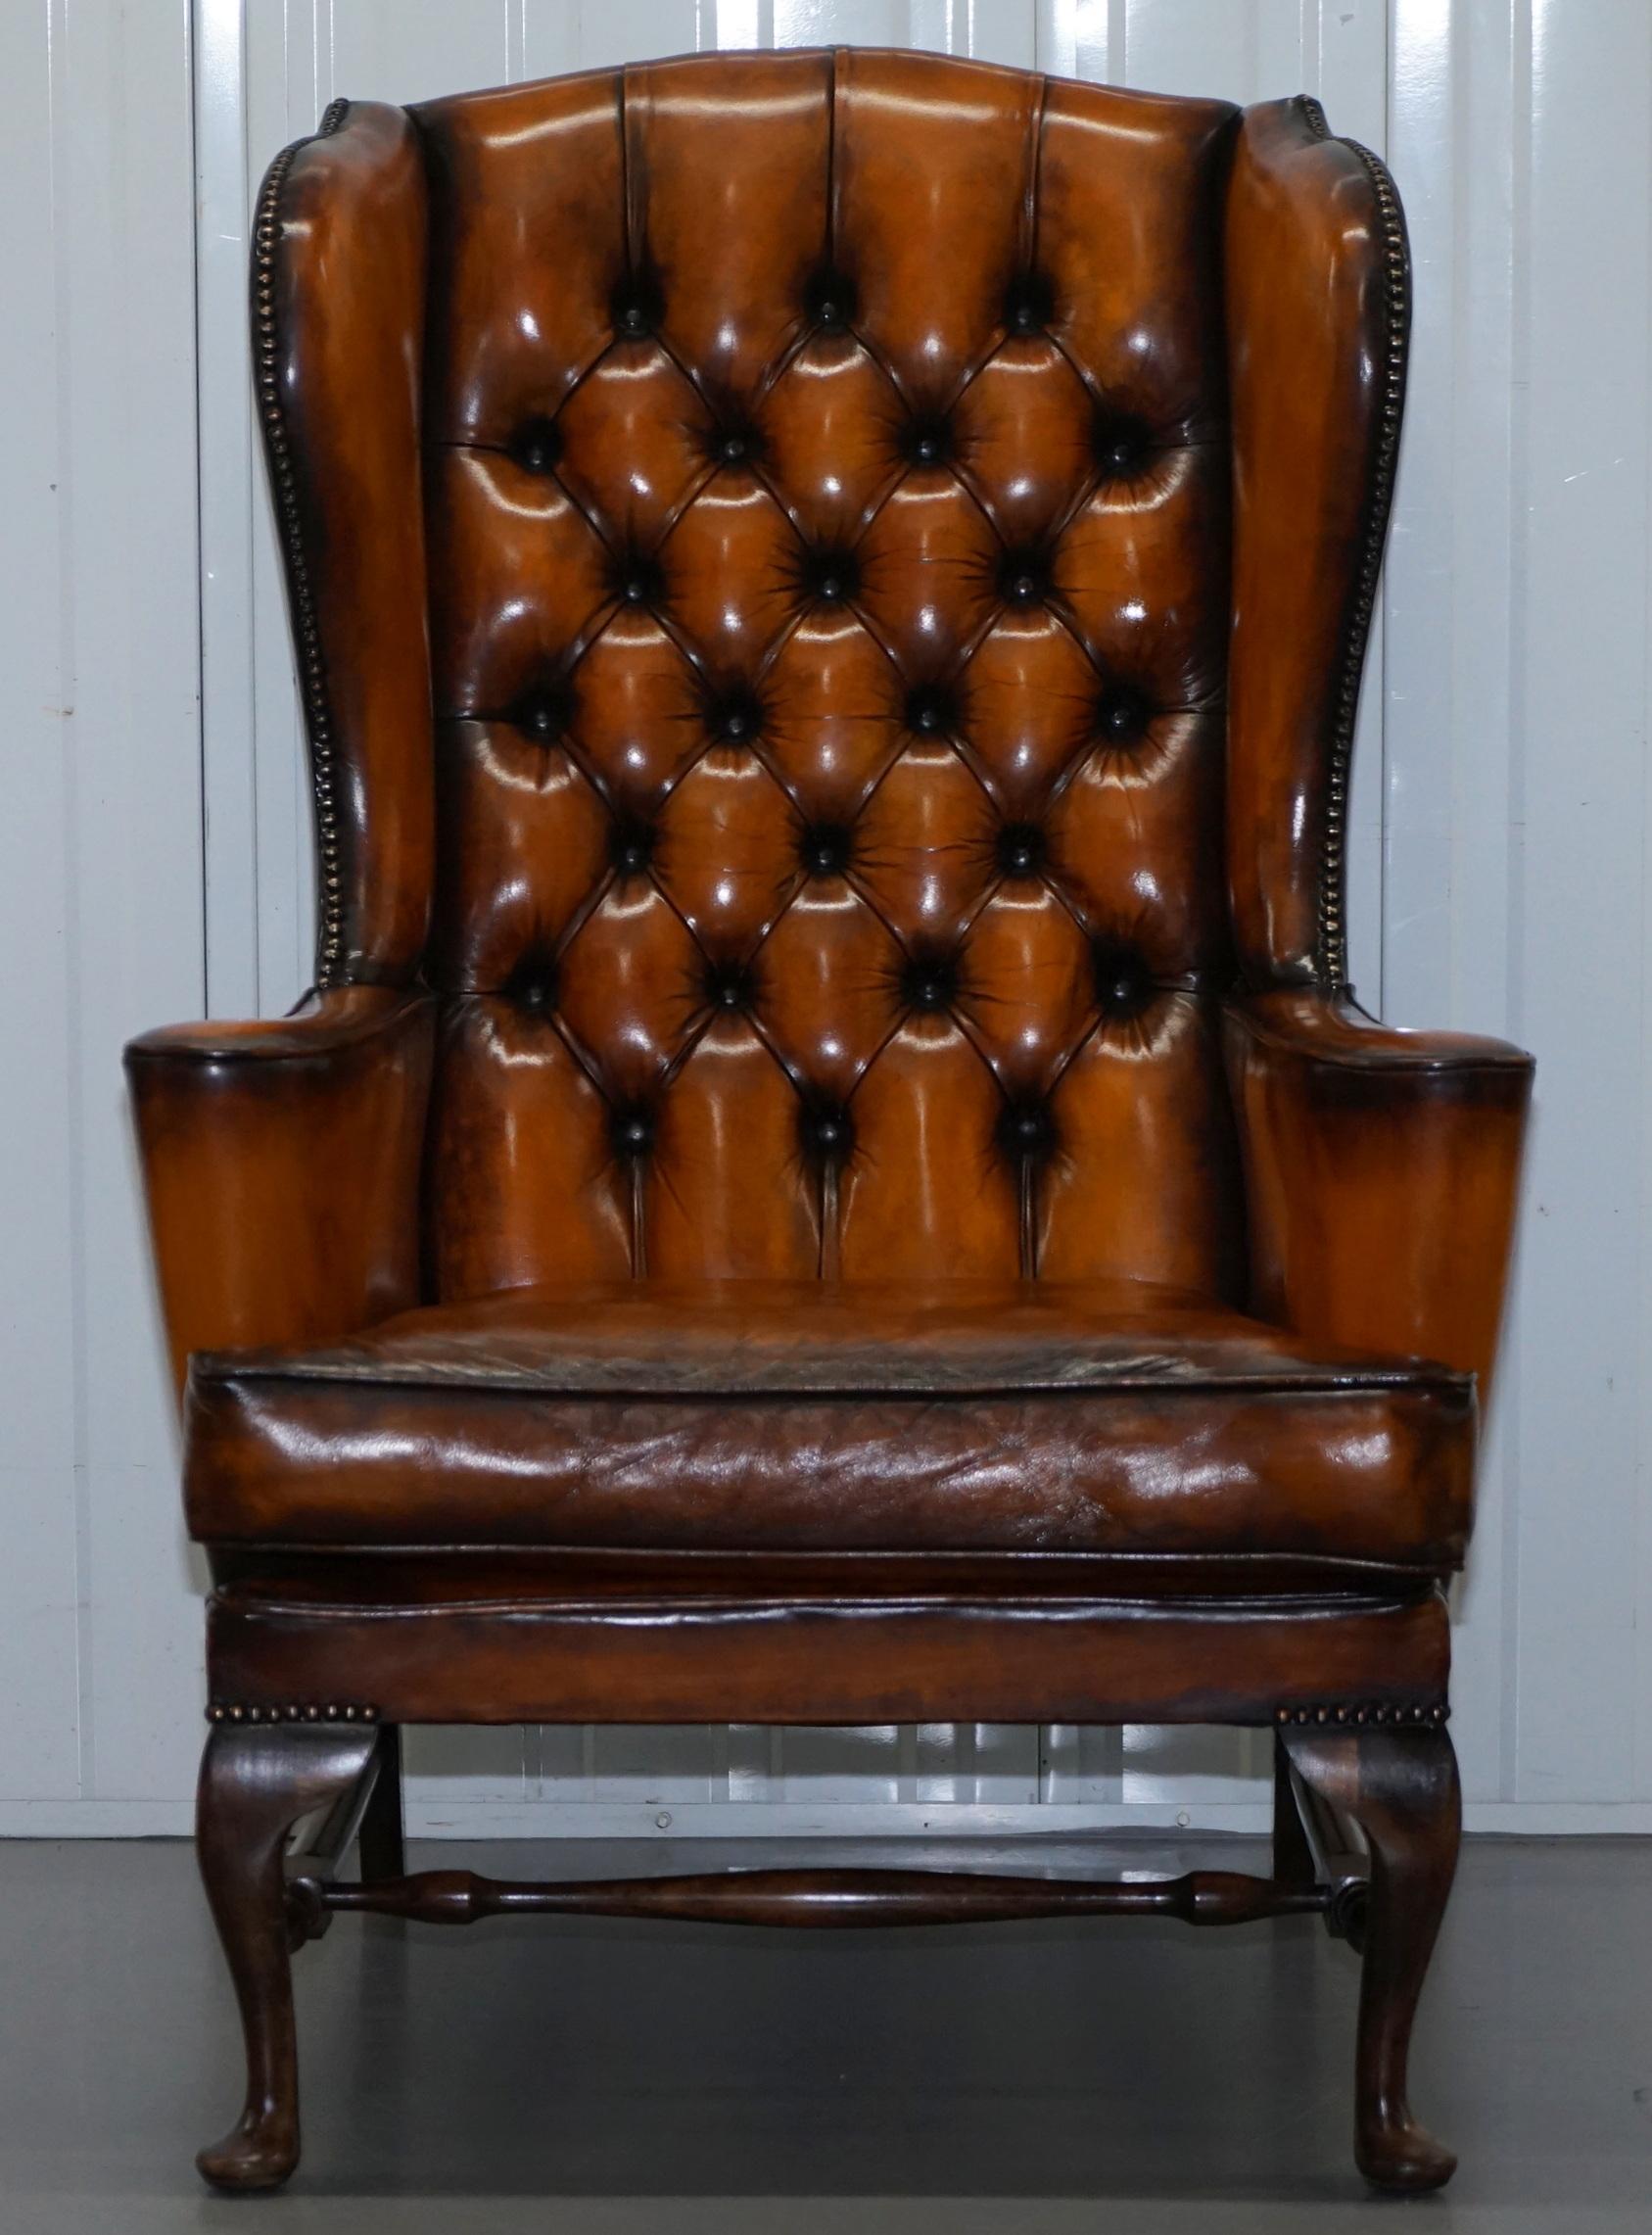 We are delighted to offer for sale this stunning fully restored Chesterfield whisky brown leather wingback armchair 

This is one of the nicer wingback chairs we have in stock, the color is rich and work and has a wonderful honest aged look and